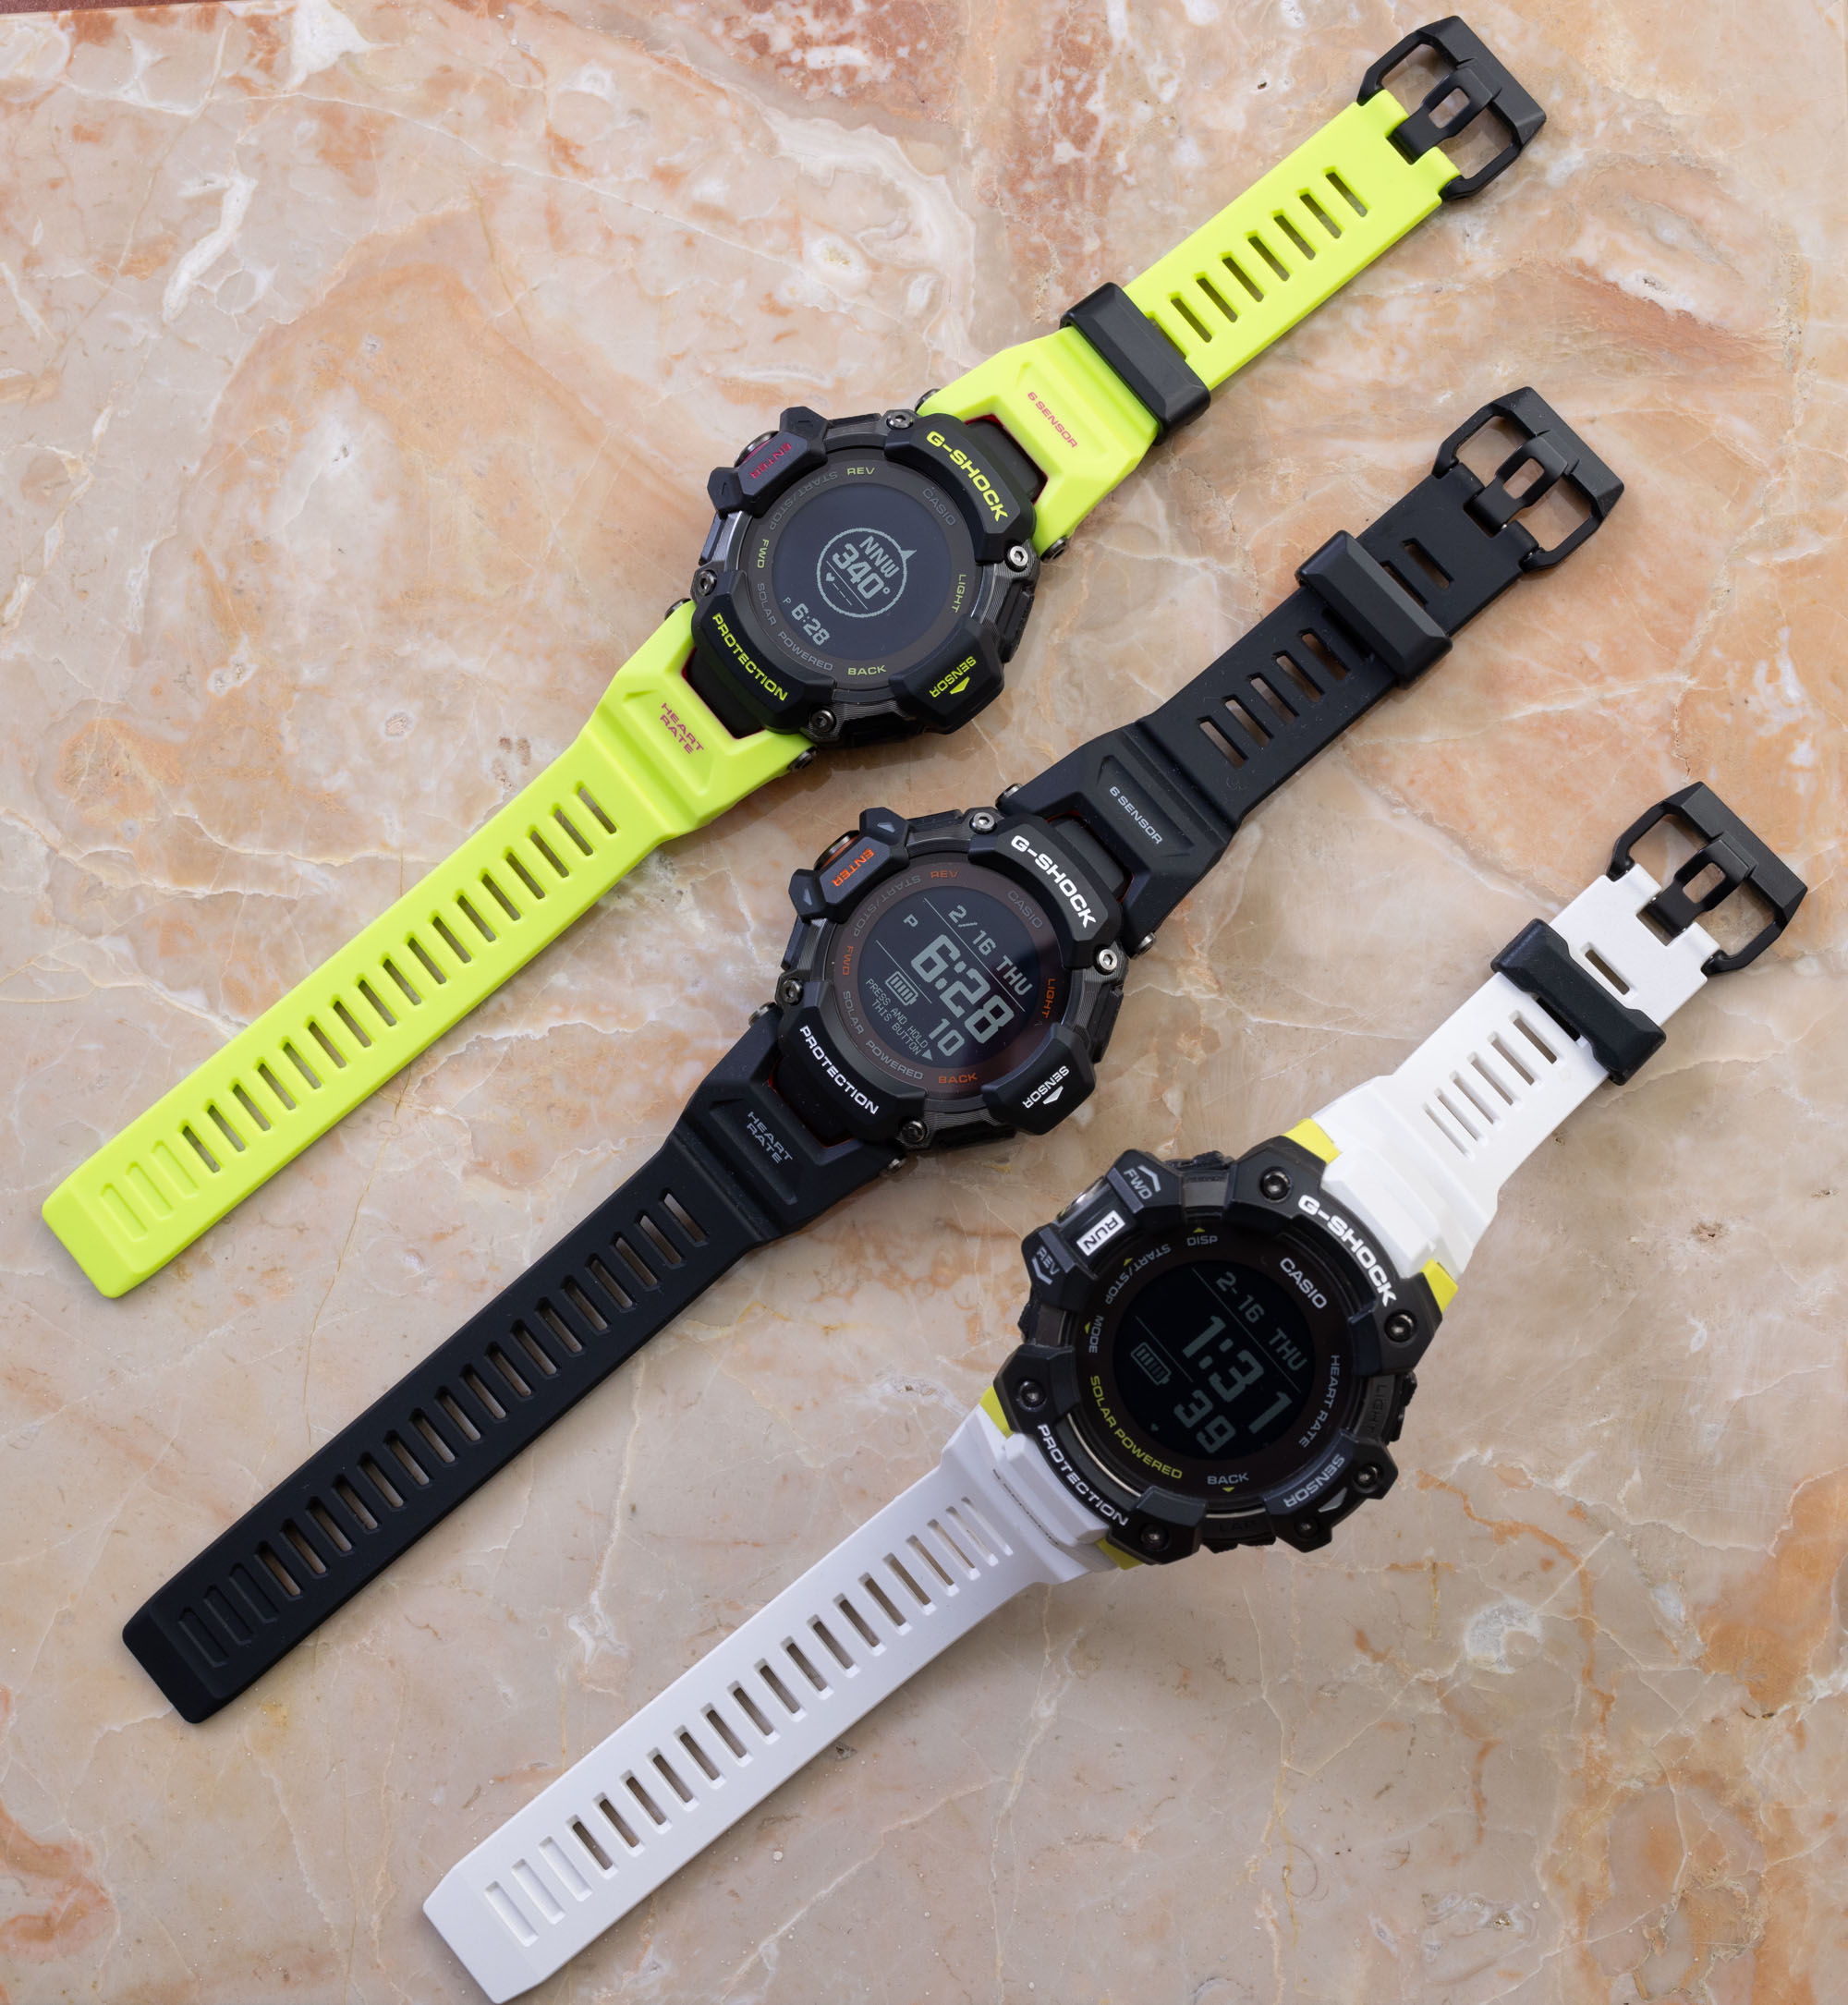 Watch Review: Casio G-Shock Move GBD-H2000 Smart Activity Tracker |  aBlogtoWatch